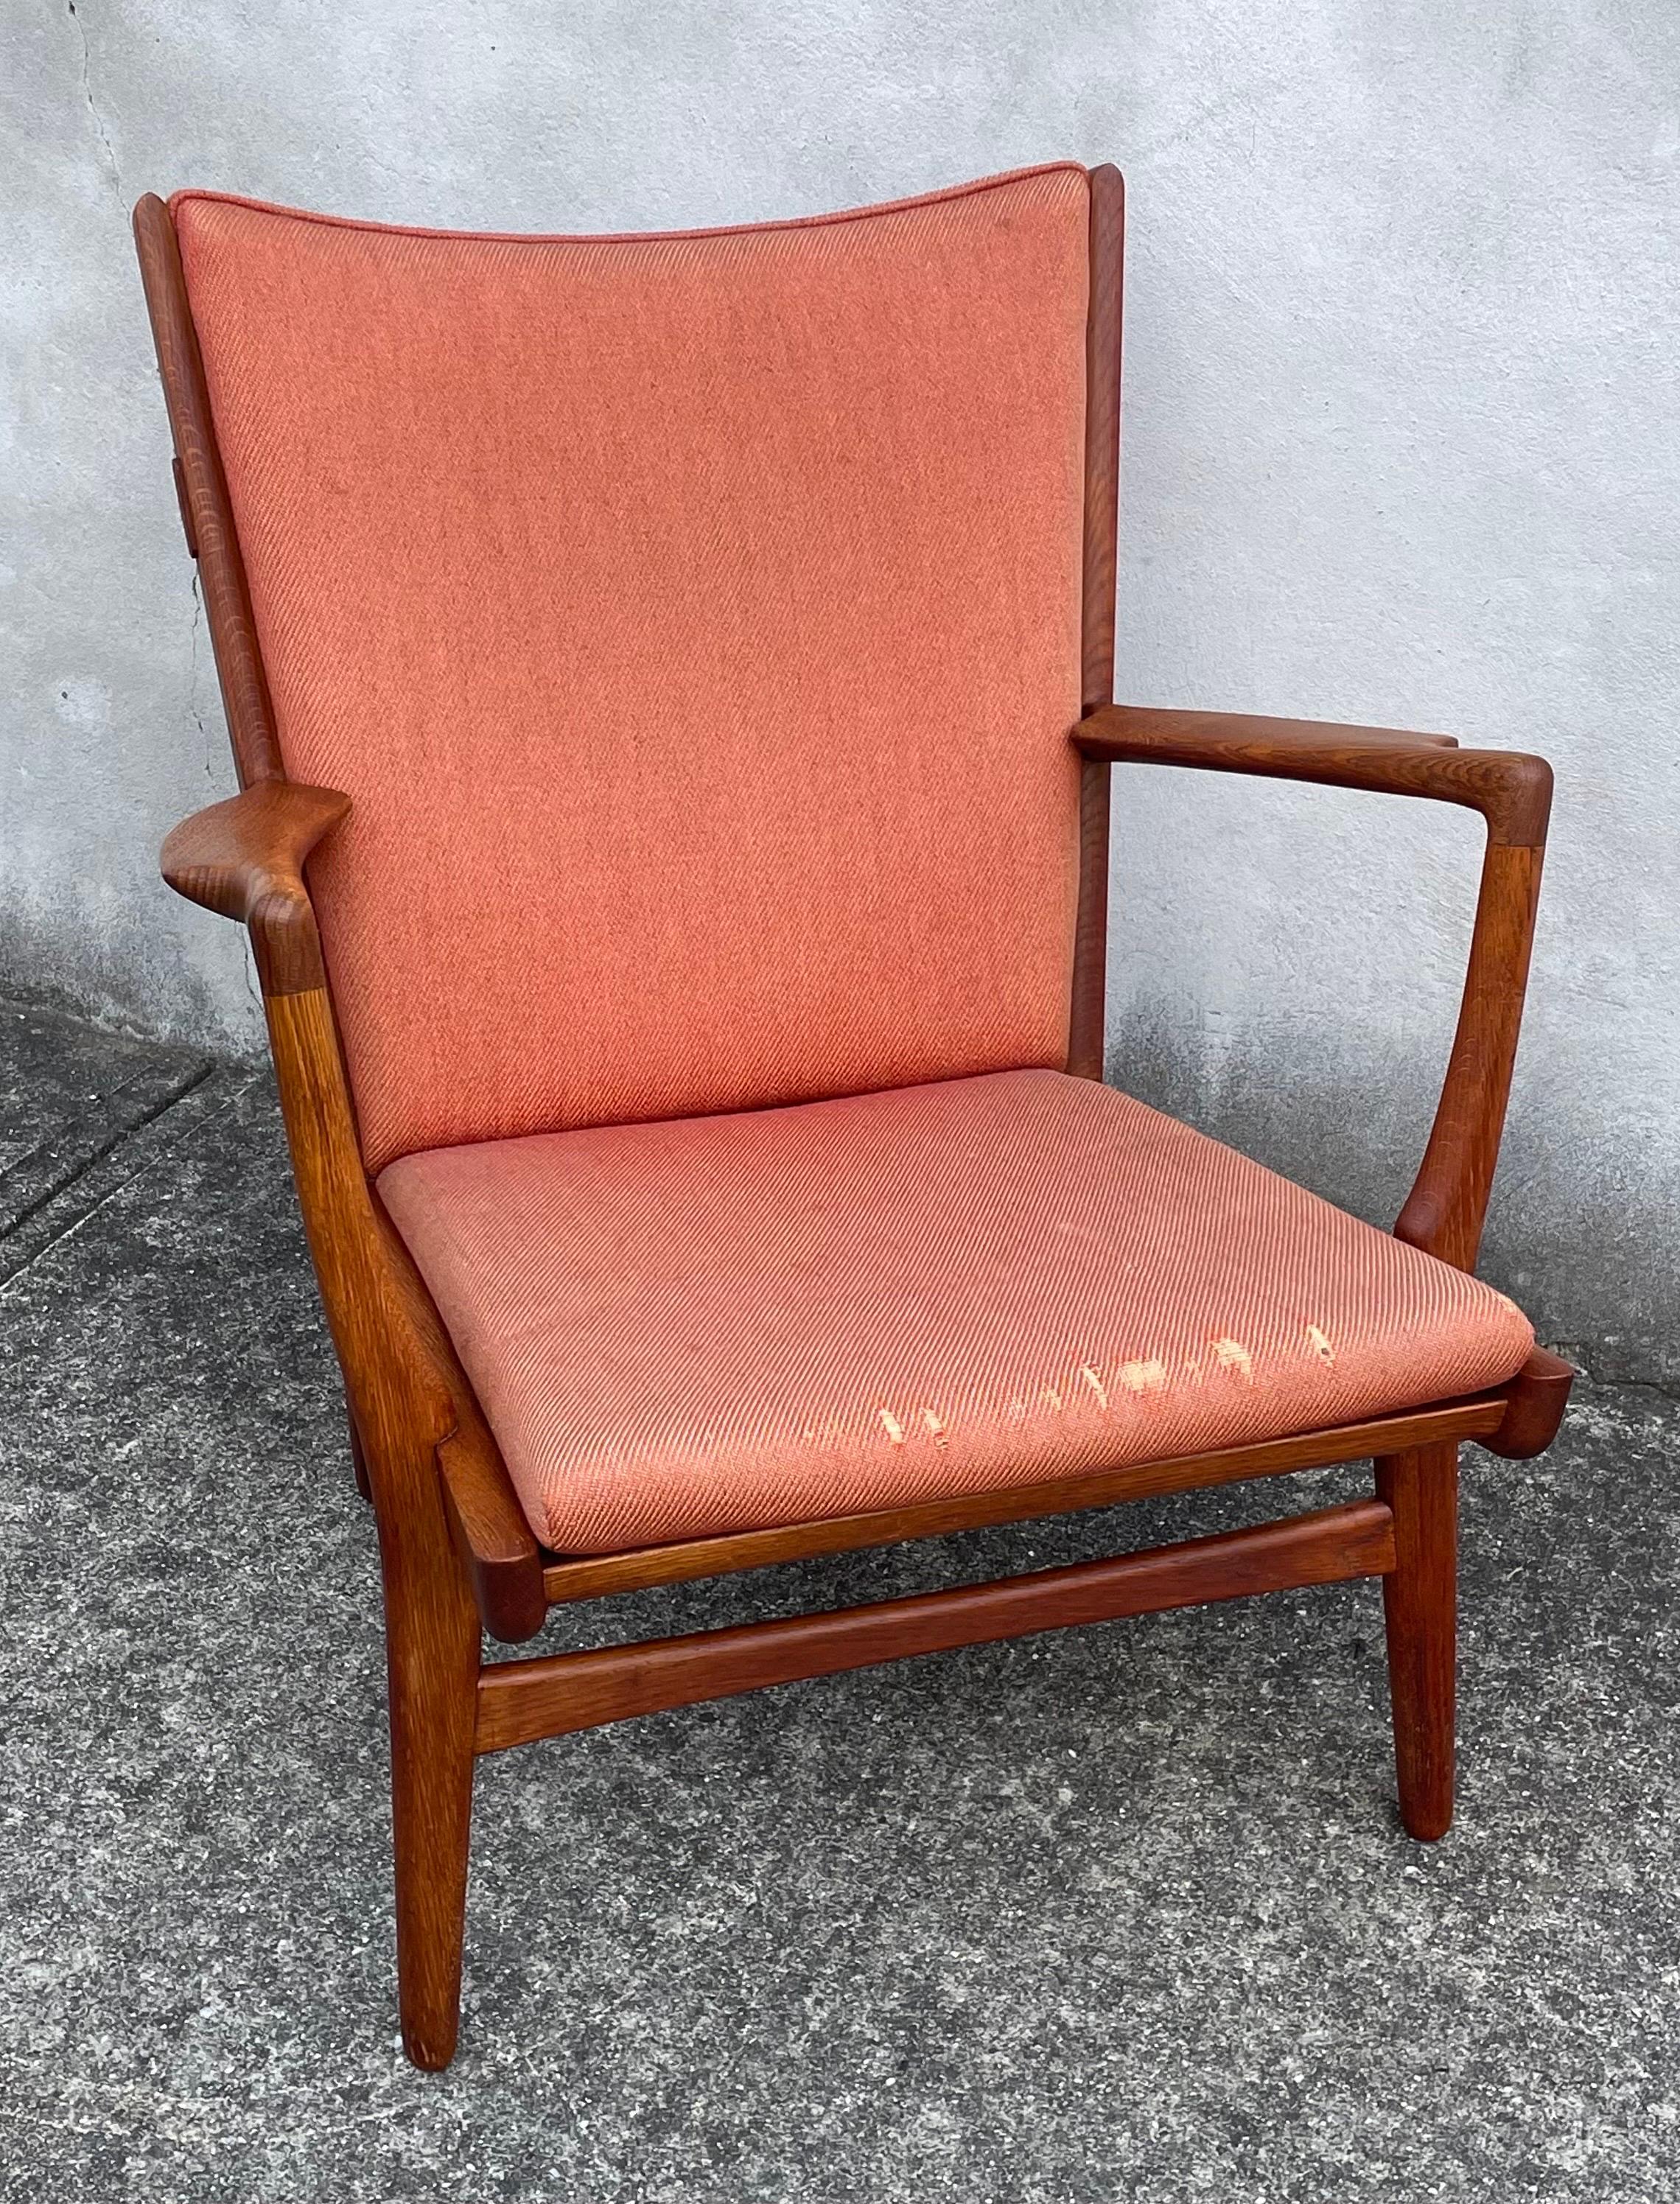 Beautiful Hans J. Wegner AP16 lounge chair in original vintage condition.  Teak frame has been professionally cleaned and oiled.  Original upholstery with wear due to age and use.